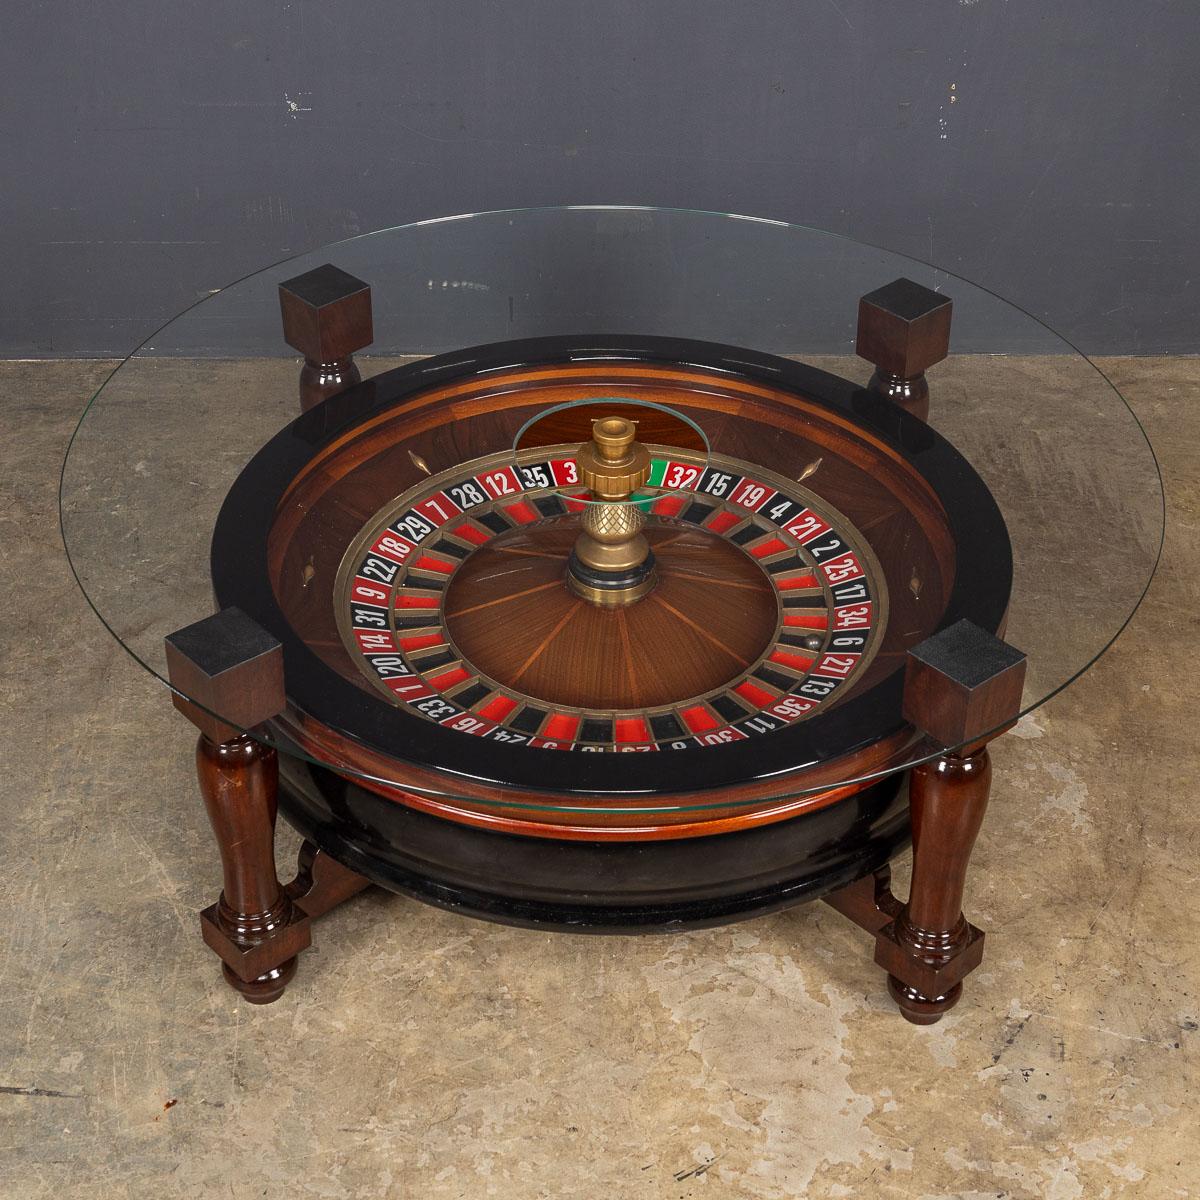 Behold, an exquisite casino roulette wheel, a masterpiece of craftsmanship, resplendent in mahogany wood adorned with intricate brass detailing. This opulent creation rests upon a finely turned mahogany base, elevating it to a true work of art. What